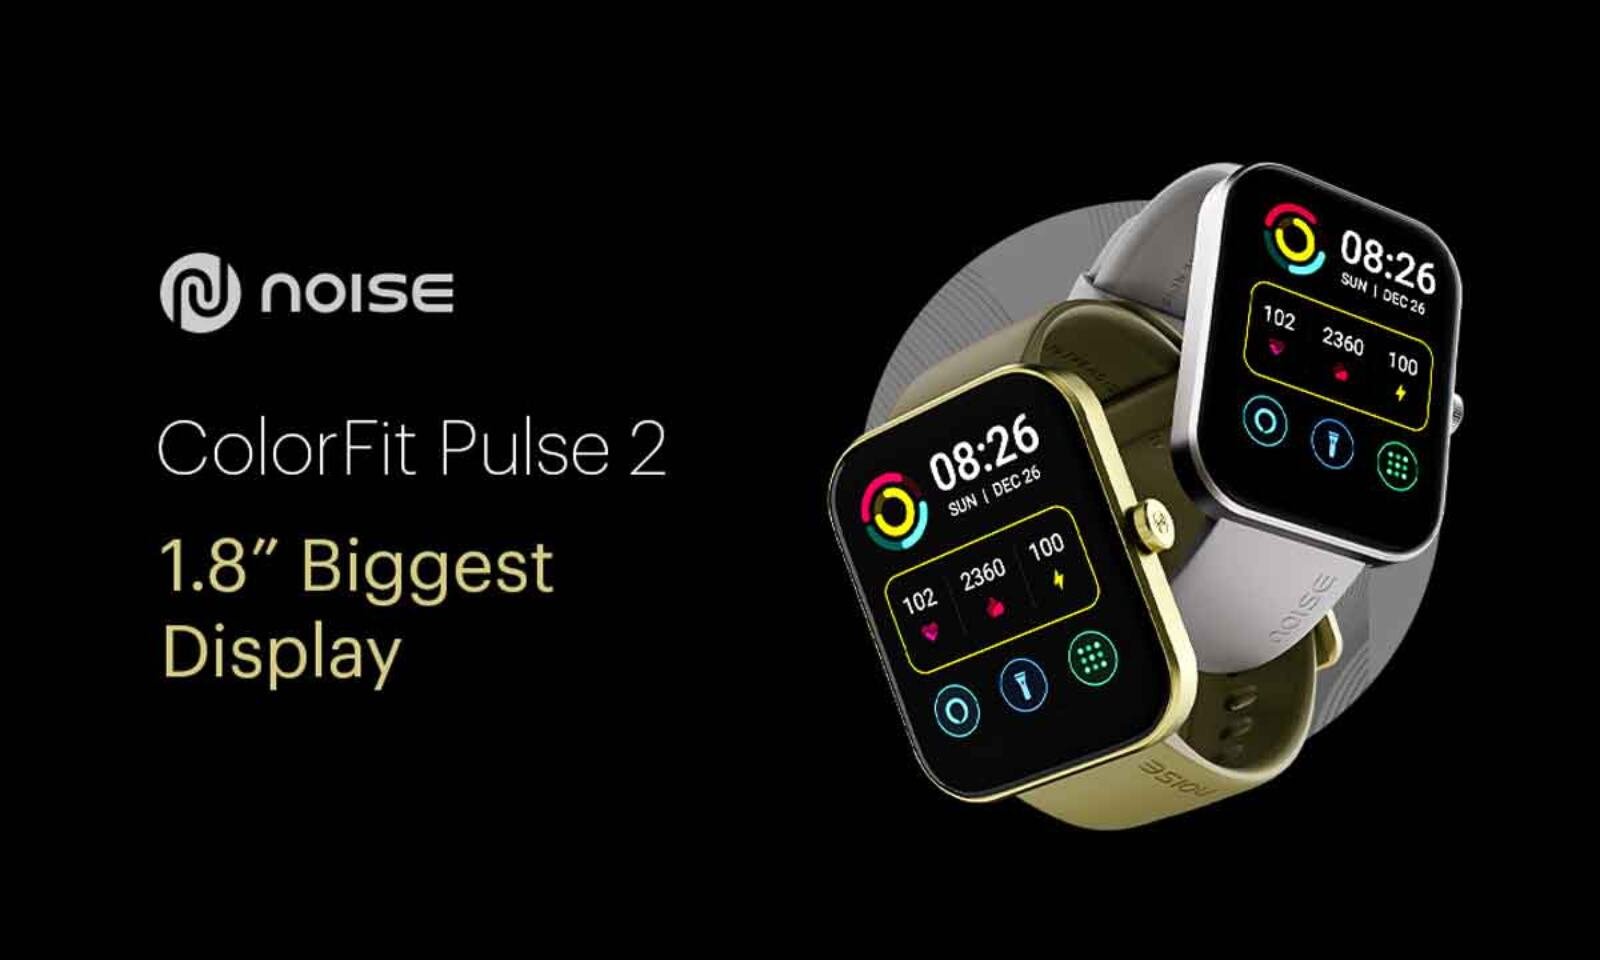 Noise launches Smartwatch ColorFit Pulse 2 with 100 cloud based watch faces